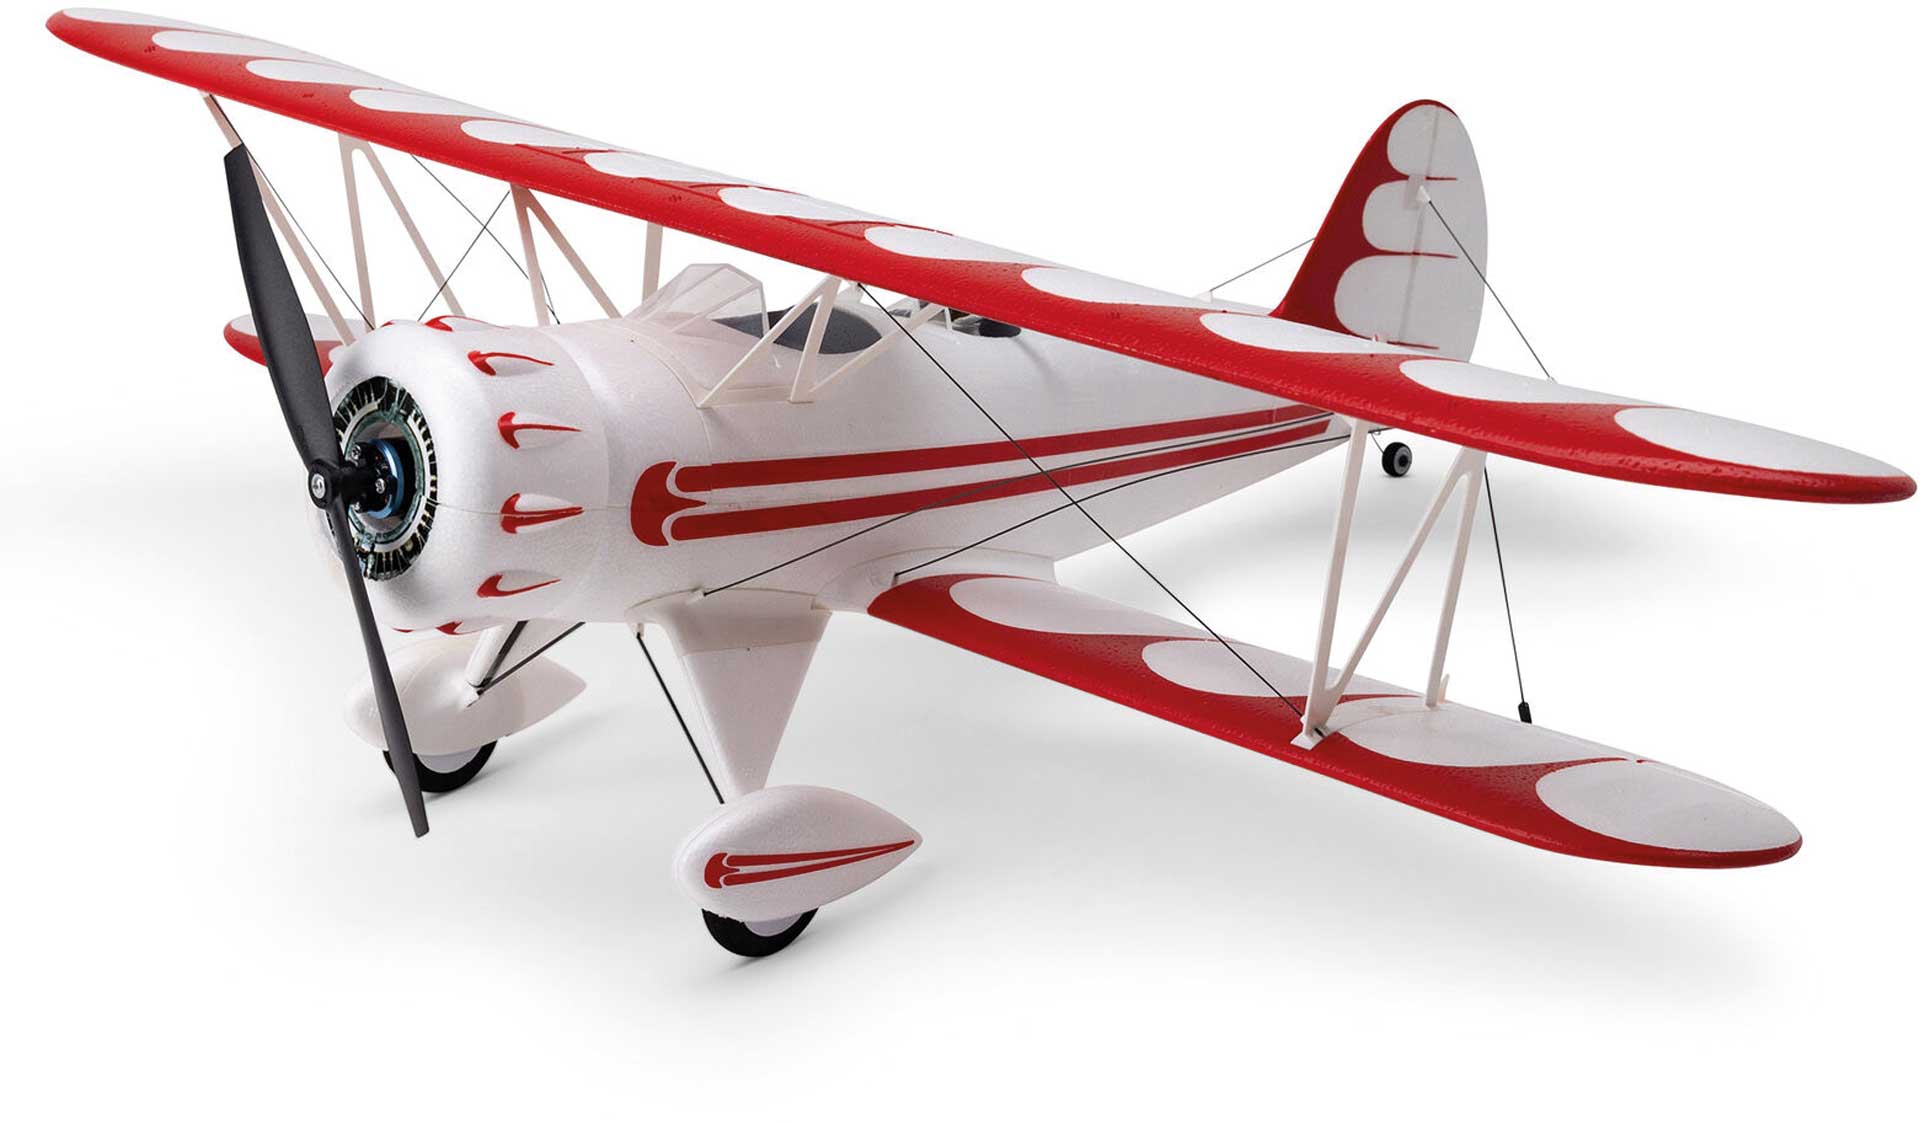 E-FLITE UMX WACO BNF Basic with AS3X and SAFE Select, white